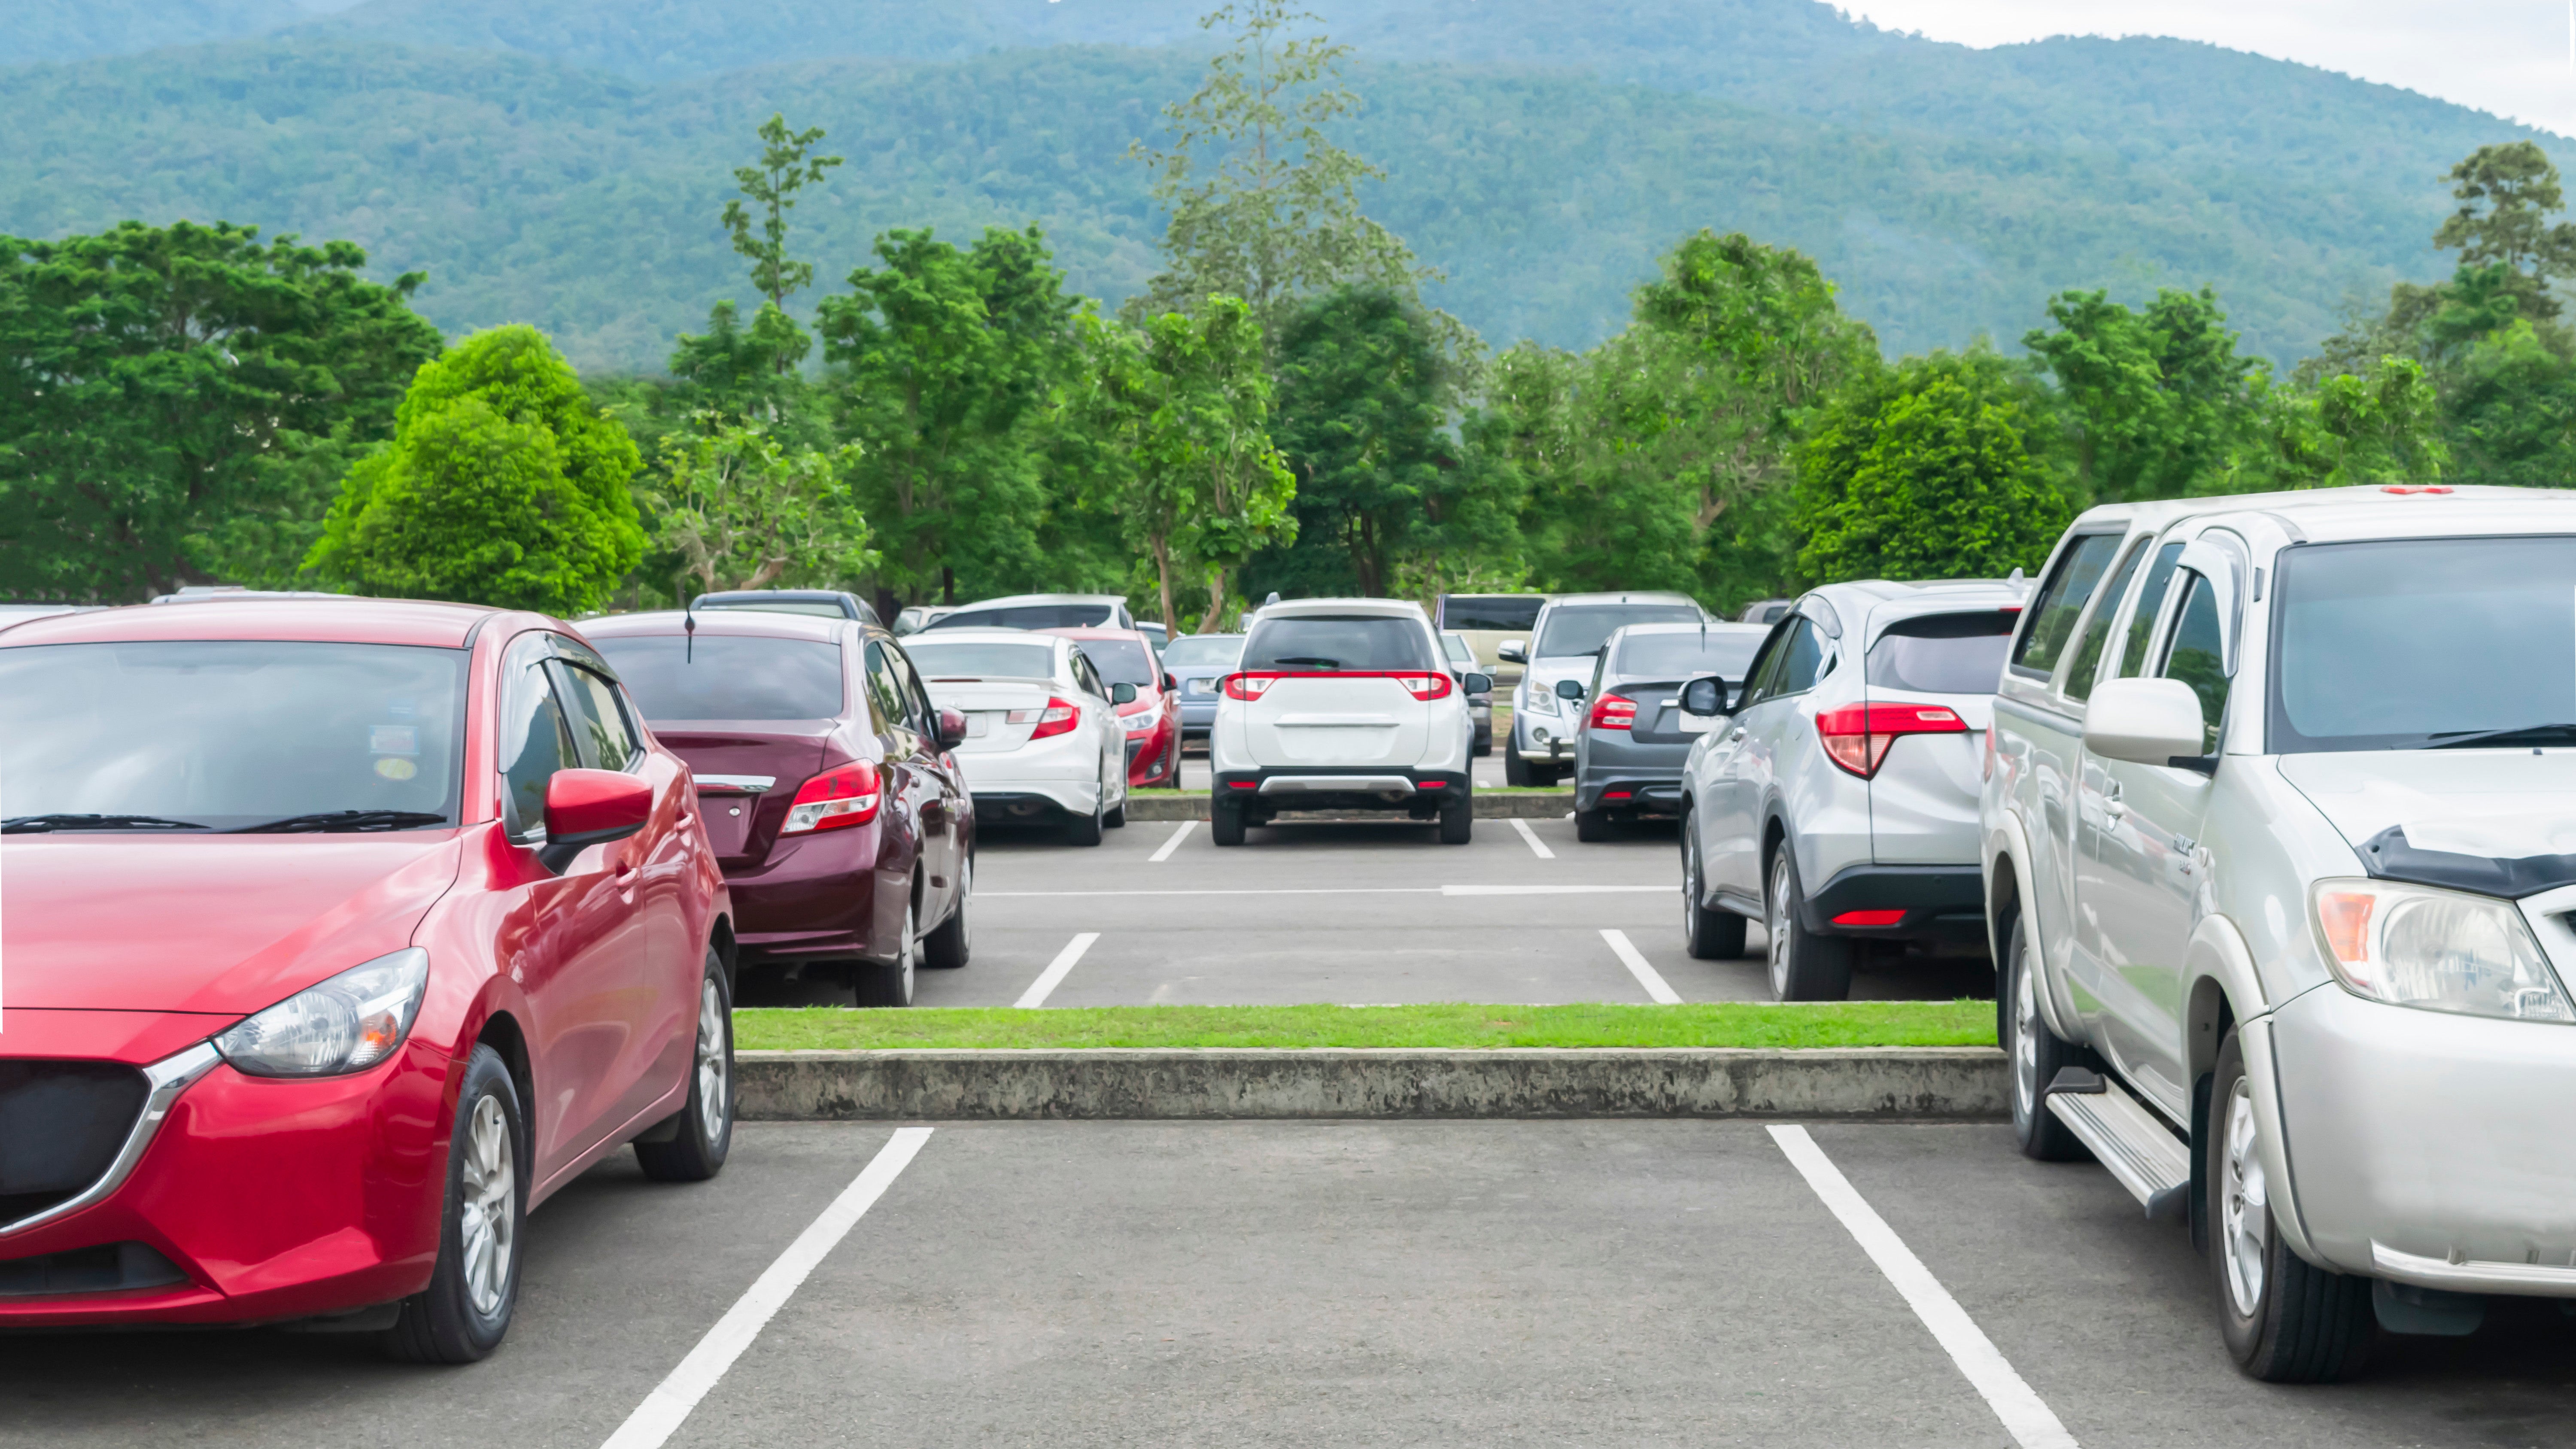 How To Find The Best Parking Spot Every Time